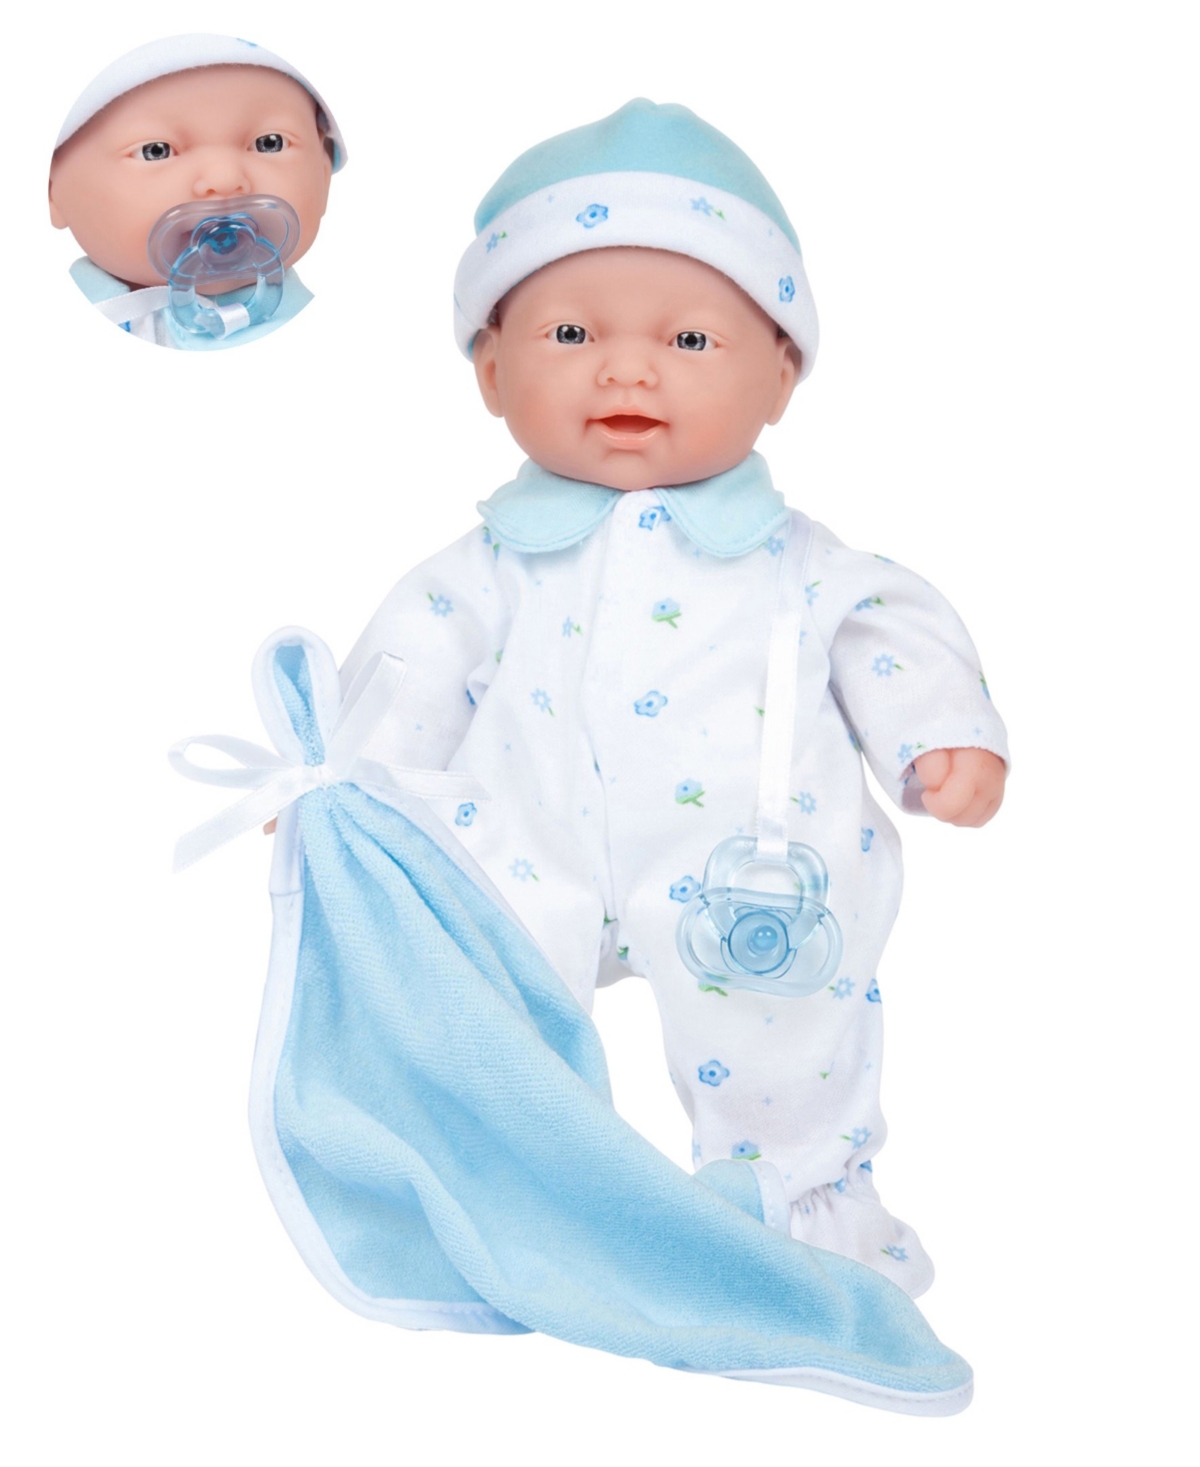 Jc Toys Kids' La Baby Caucasian 11" Soft Body Baby Doll Blue Outfit